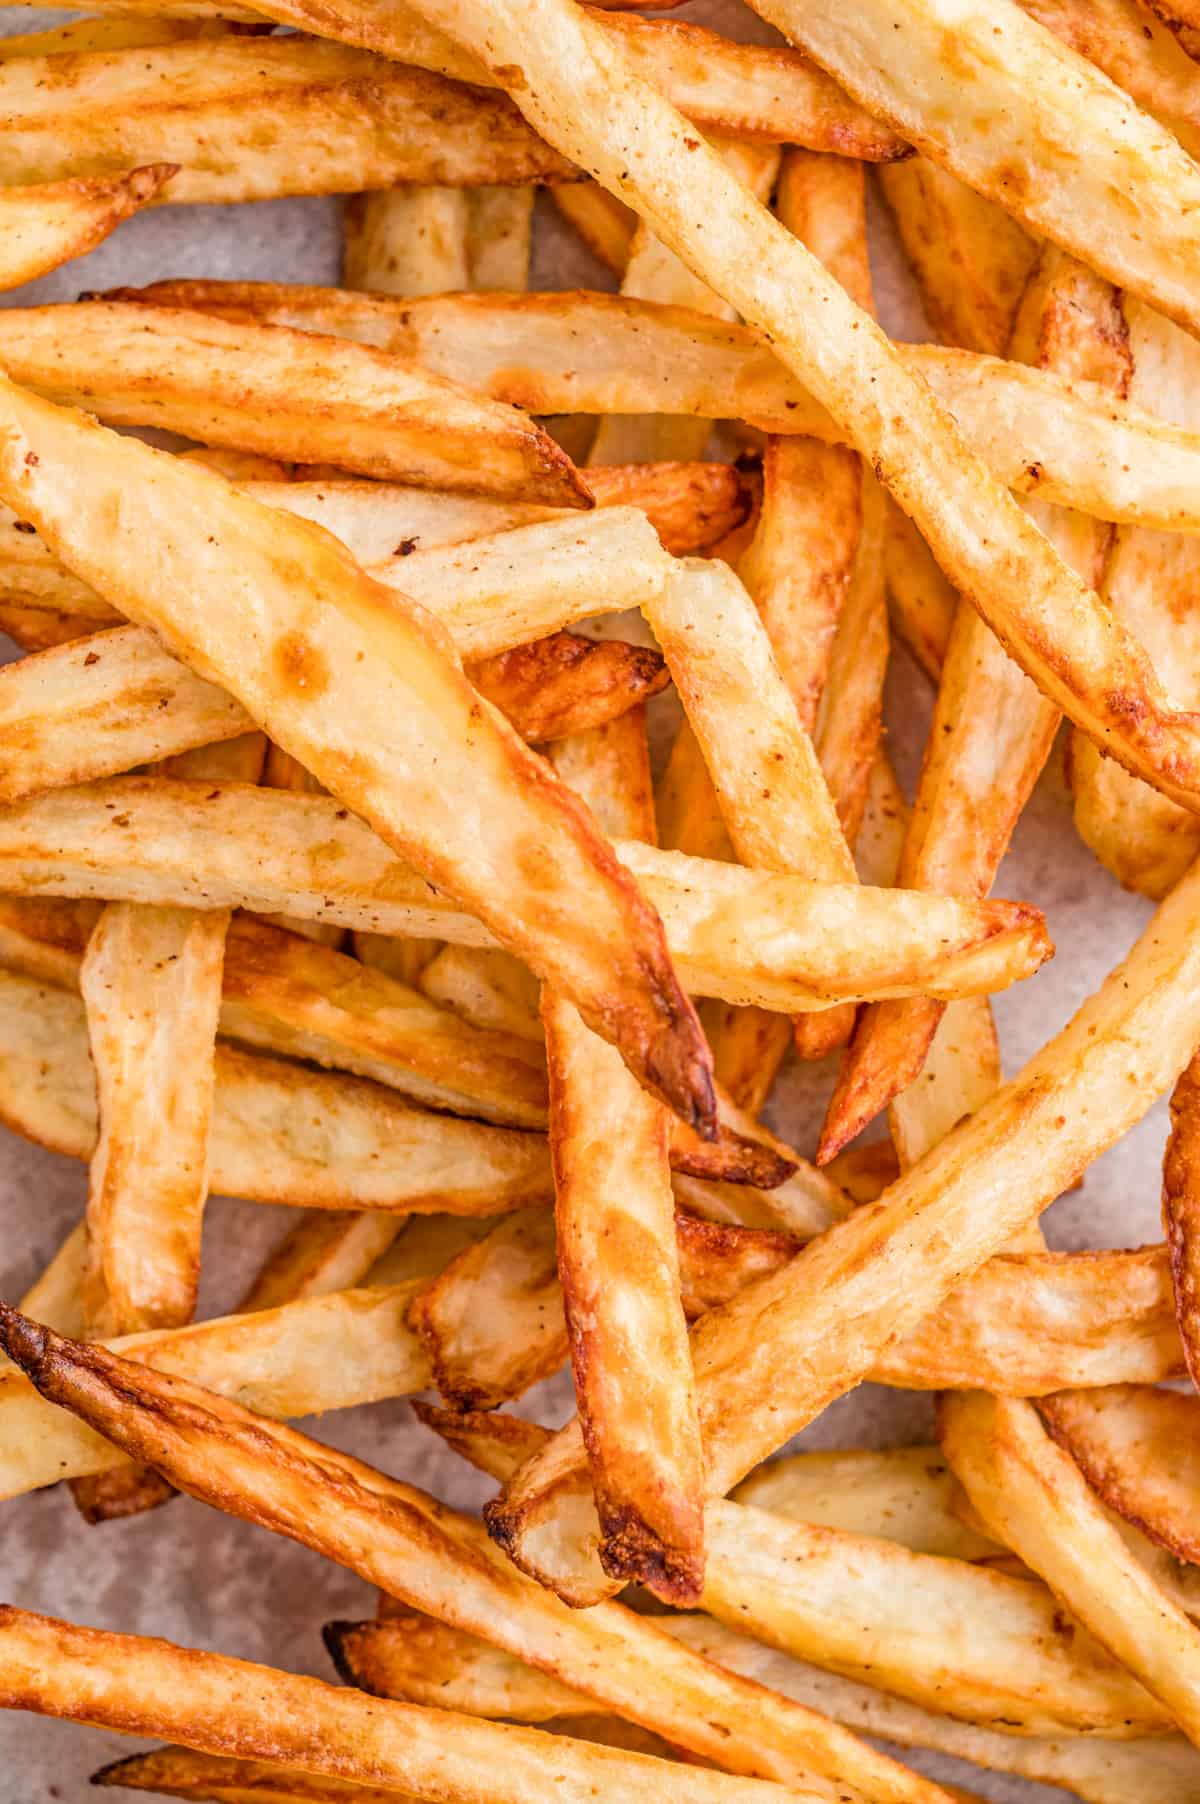 Close up of Air Fryer French Fries showing the golden brown from cooking.